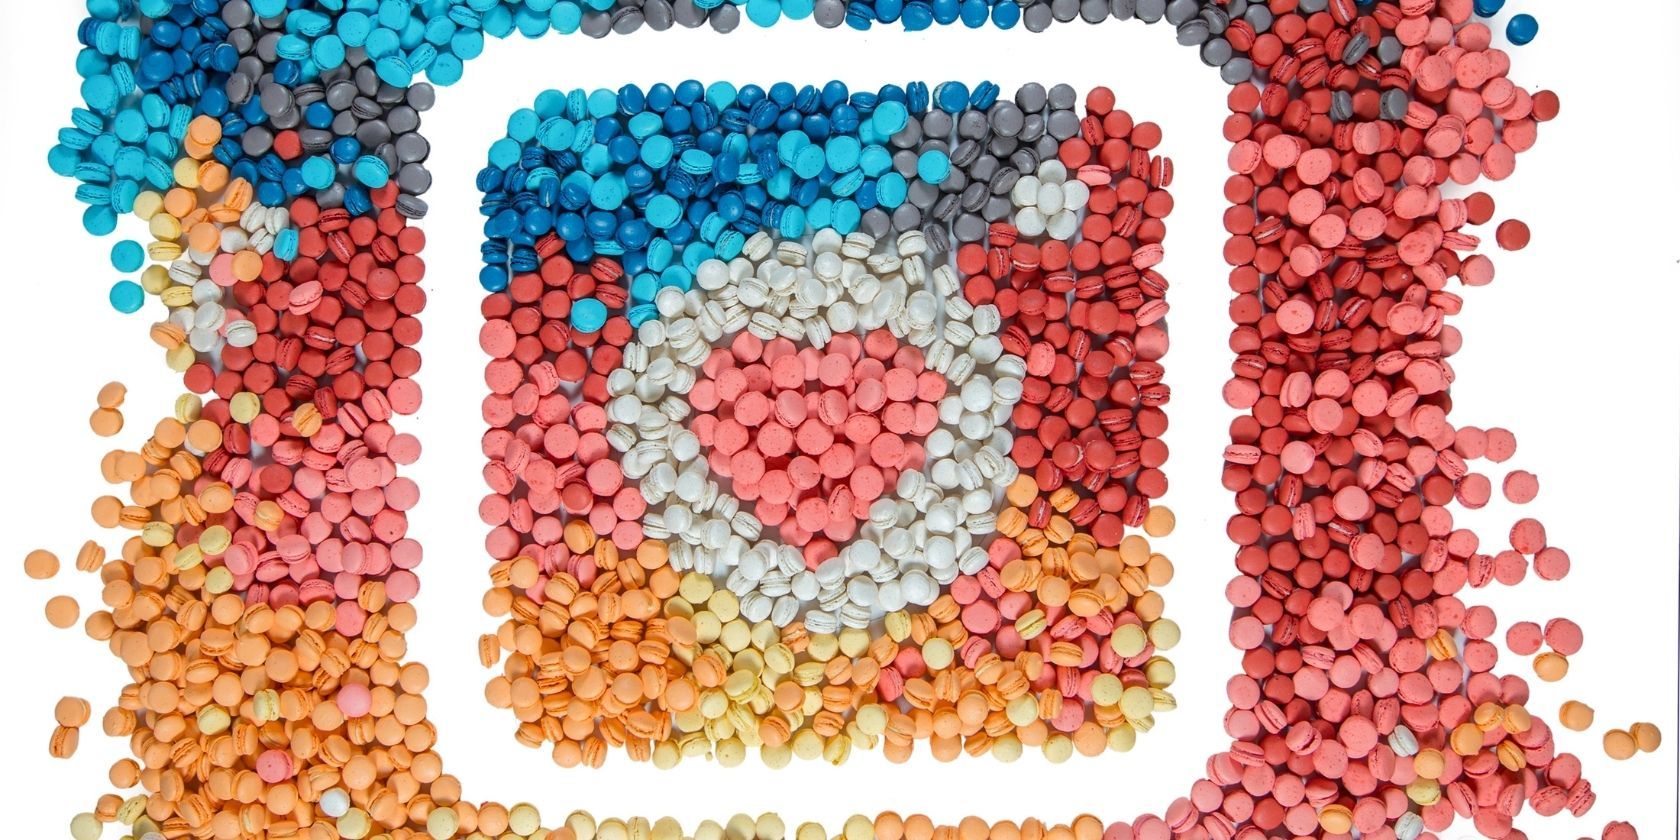 Instagram icon made with macaroons